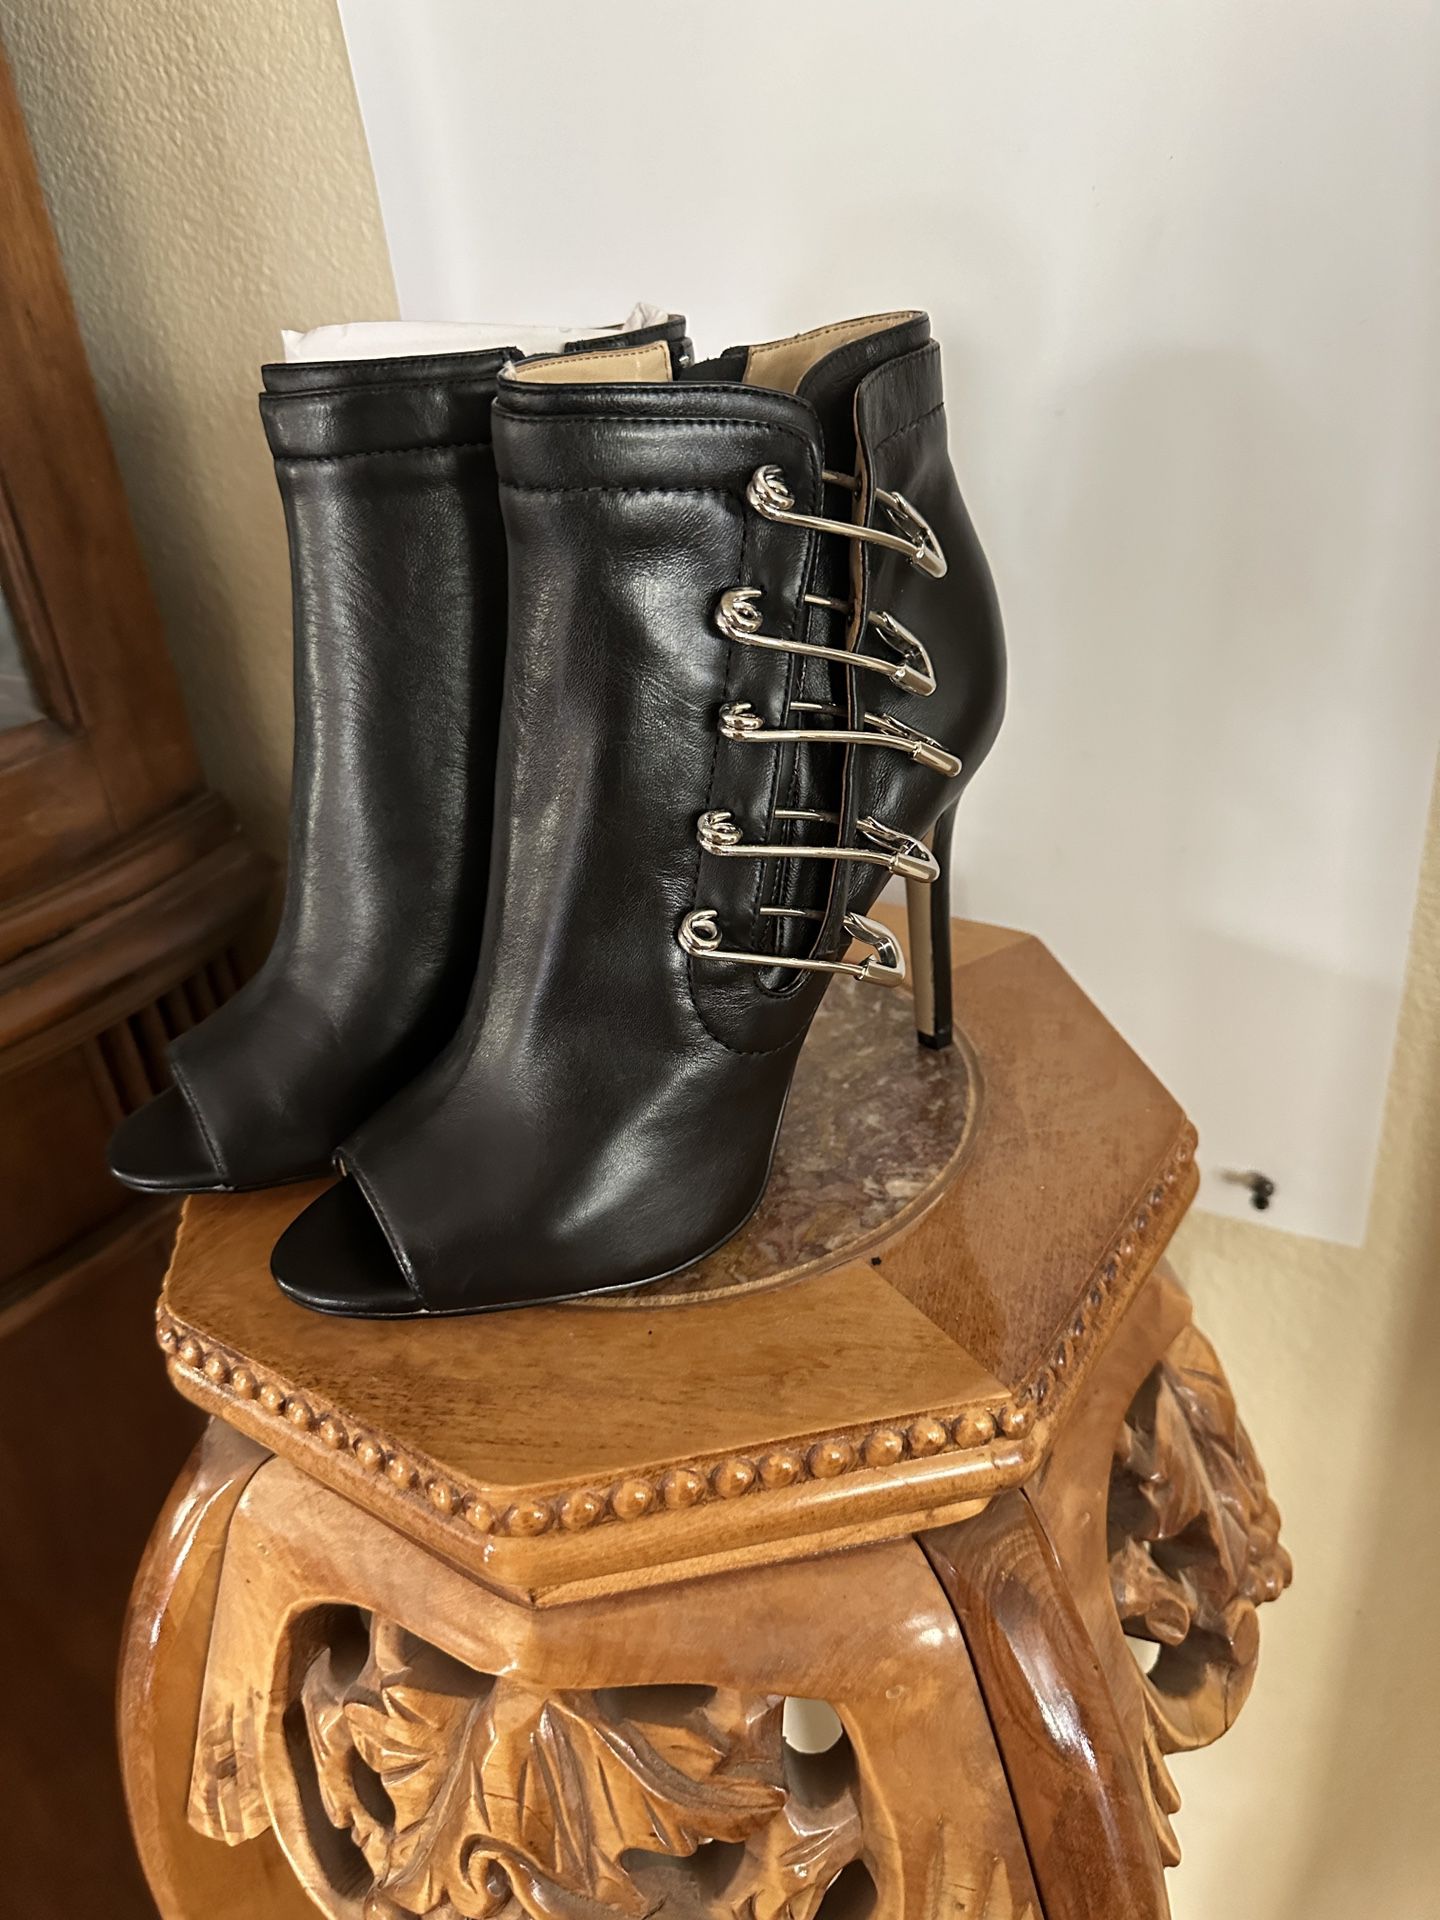 Katy Perry Boots Size 8